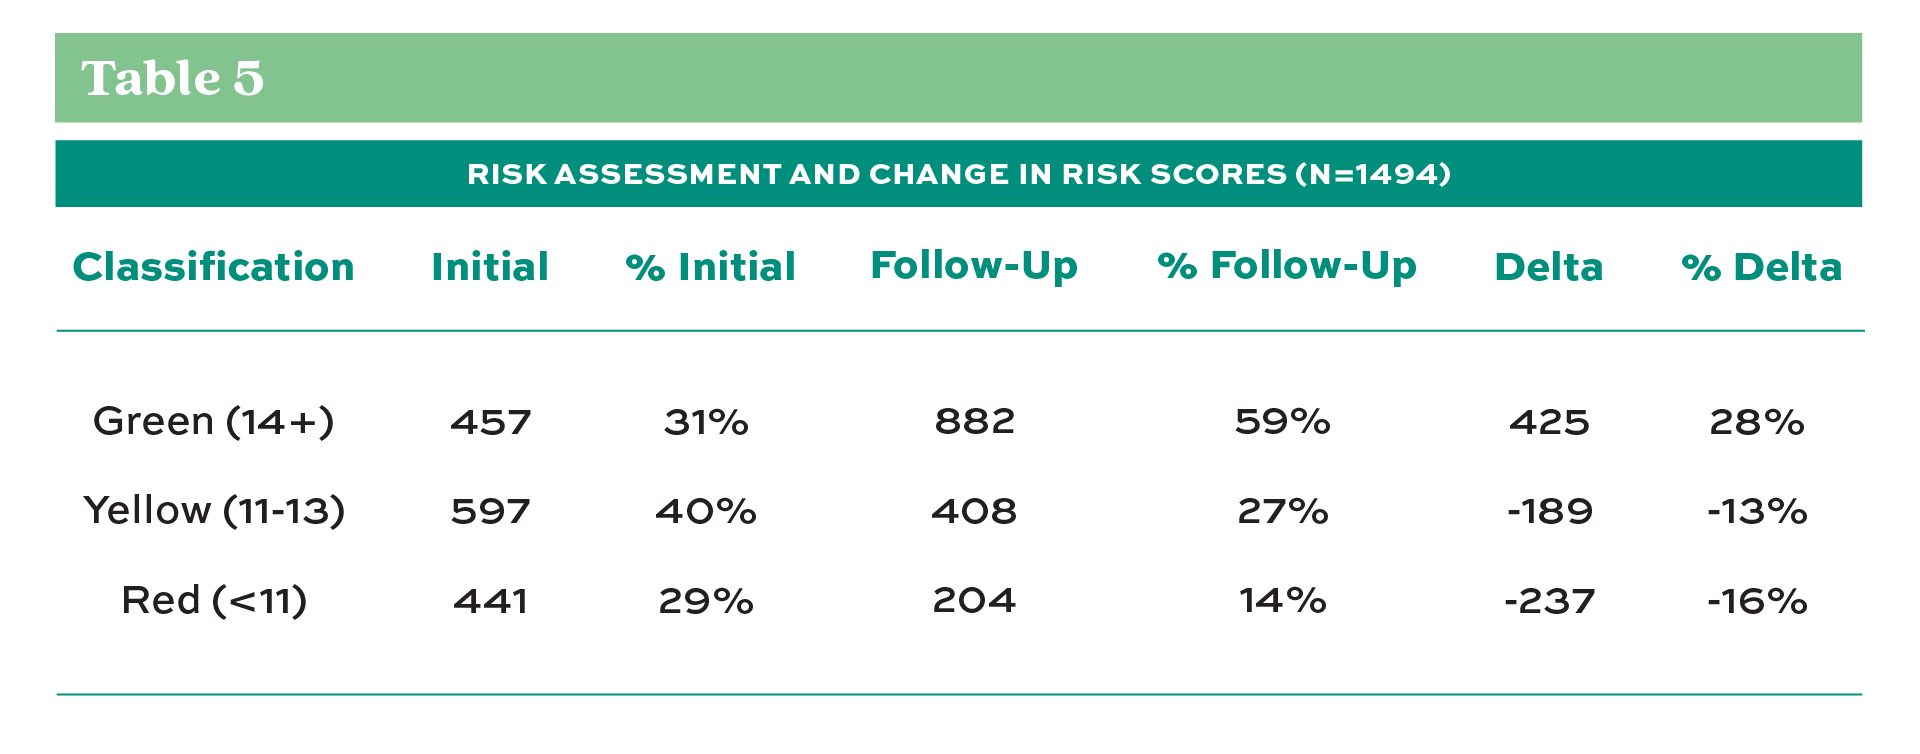 Table 5 - Risk Assessment and Change in Risk Scores